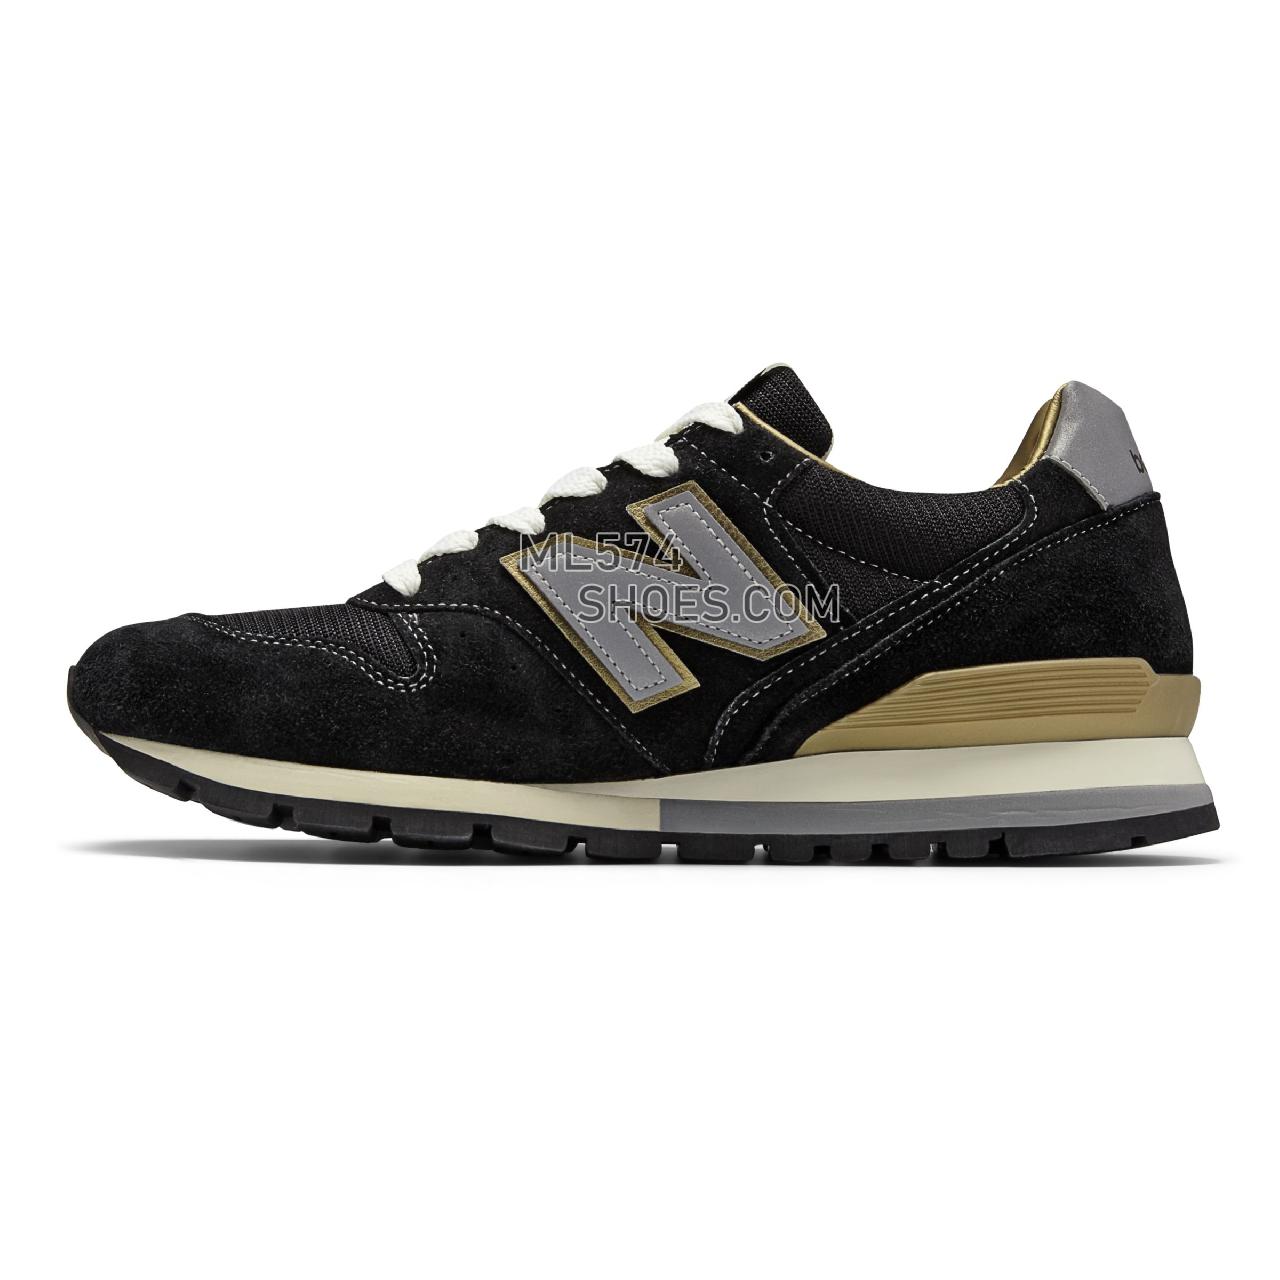 New Balance 996 Made in US - Men's 996 - Classic Black with Silver - ML996EK